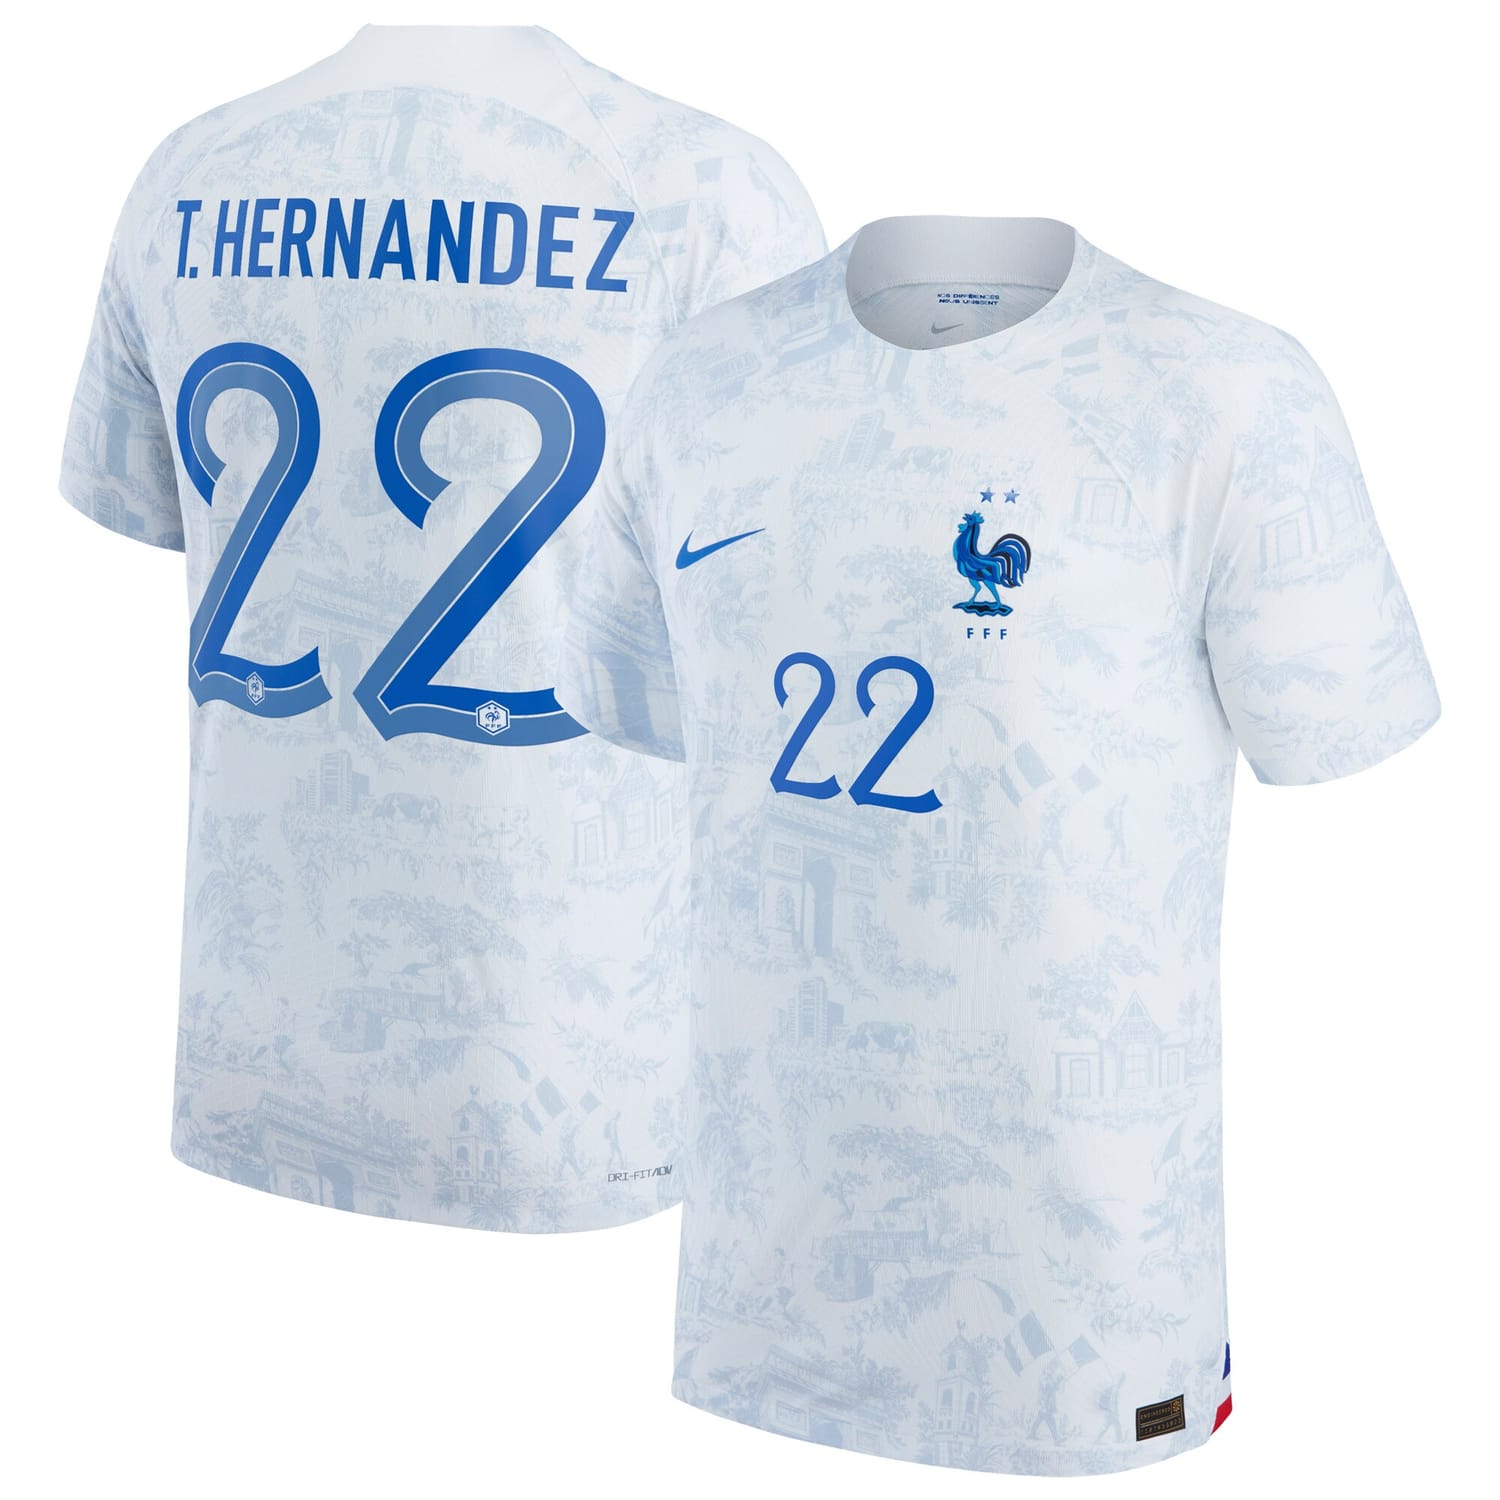 France National Team Away Authentic Jersey Shirt 2022 player Theo Hernandez printing for Men